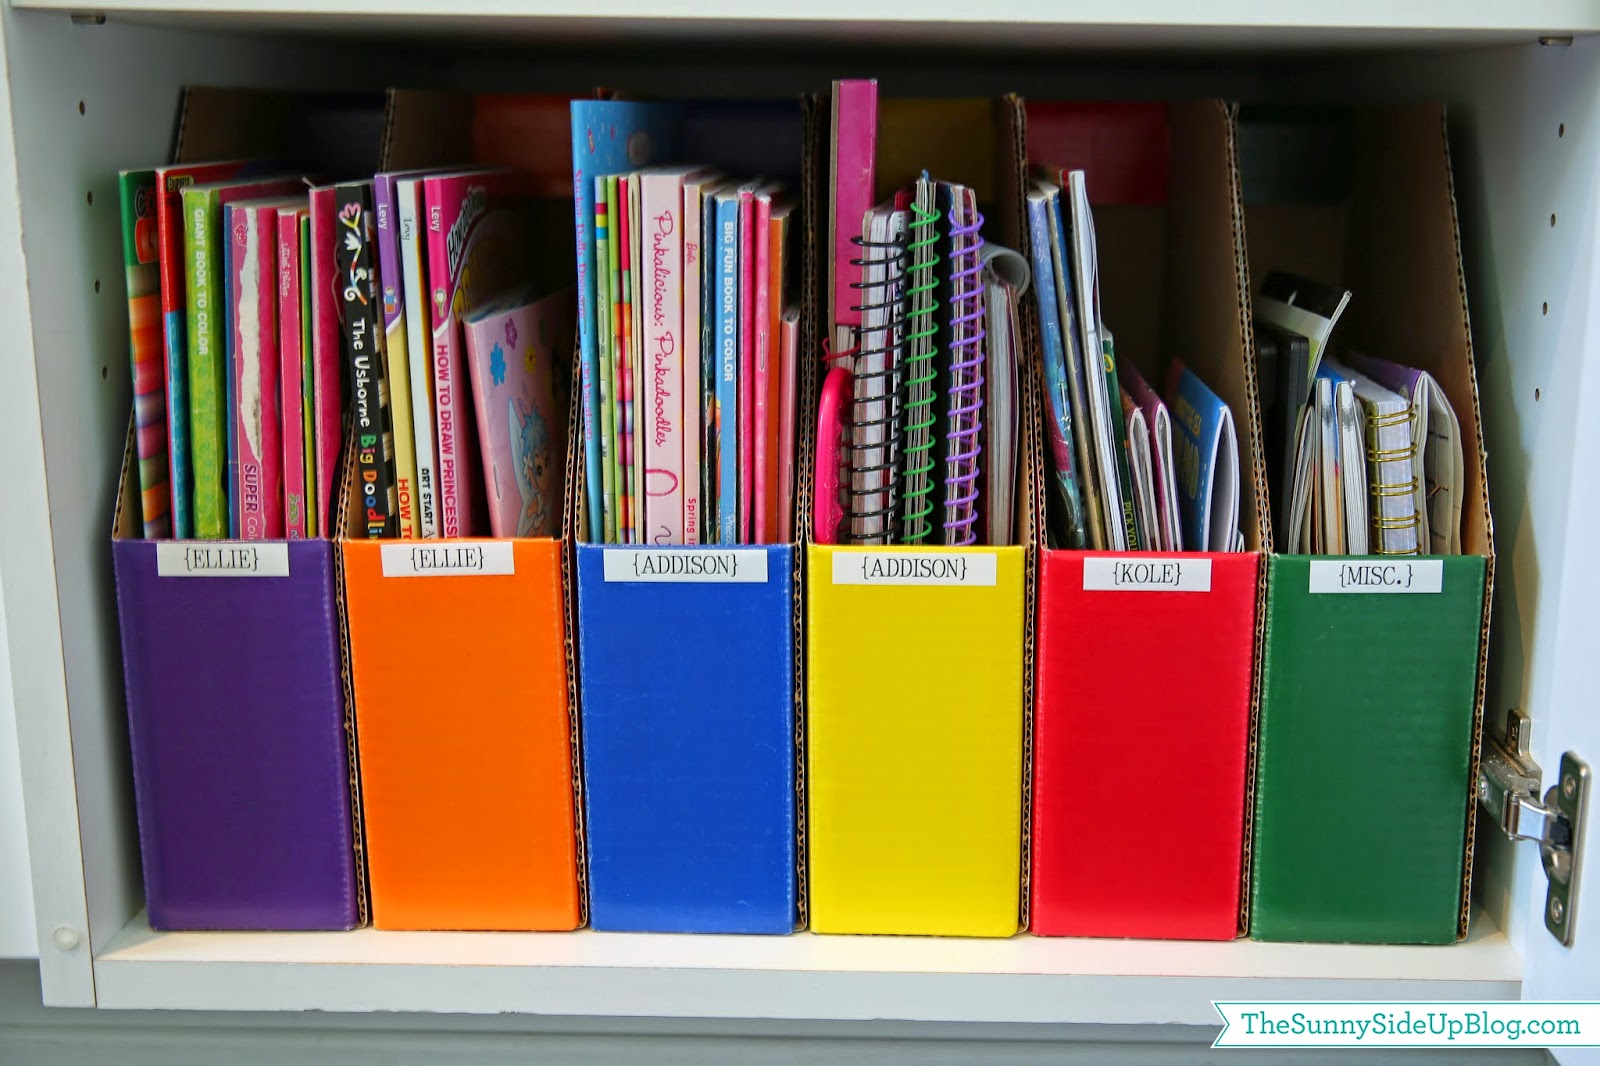 Coloring books and story books can be stored in DIY magazine holders.